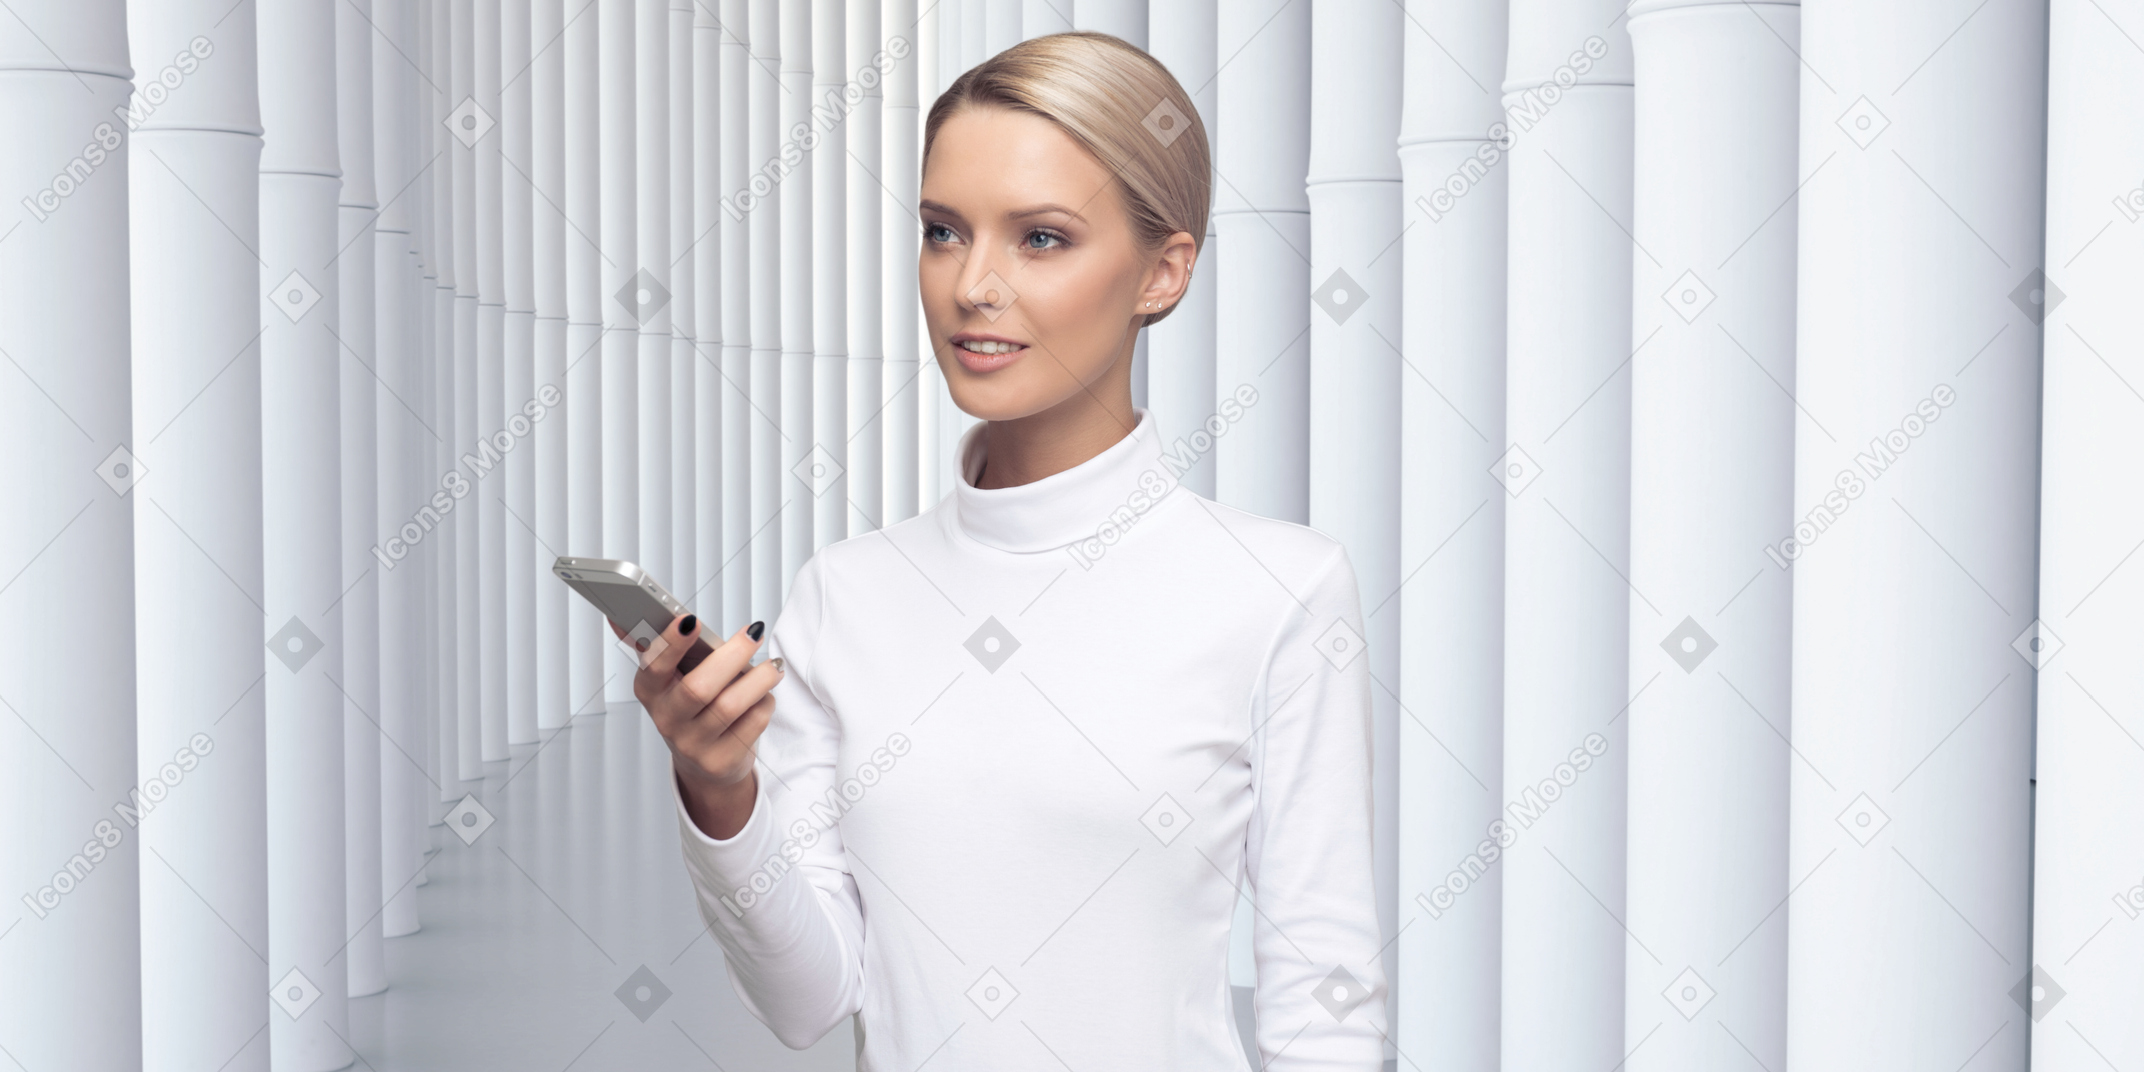 Beautiful android with a smartphone, standing against a futuristic colonnade of white columns